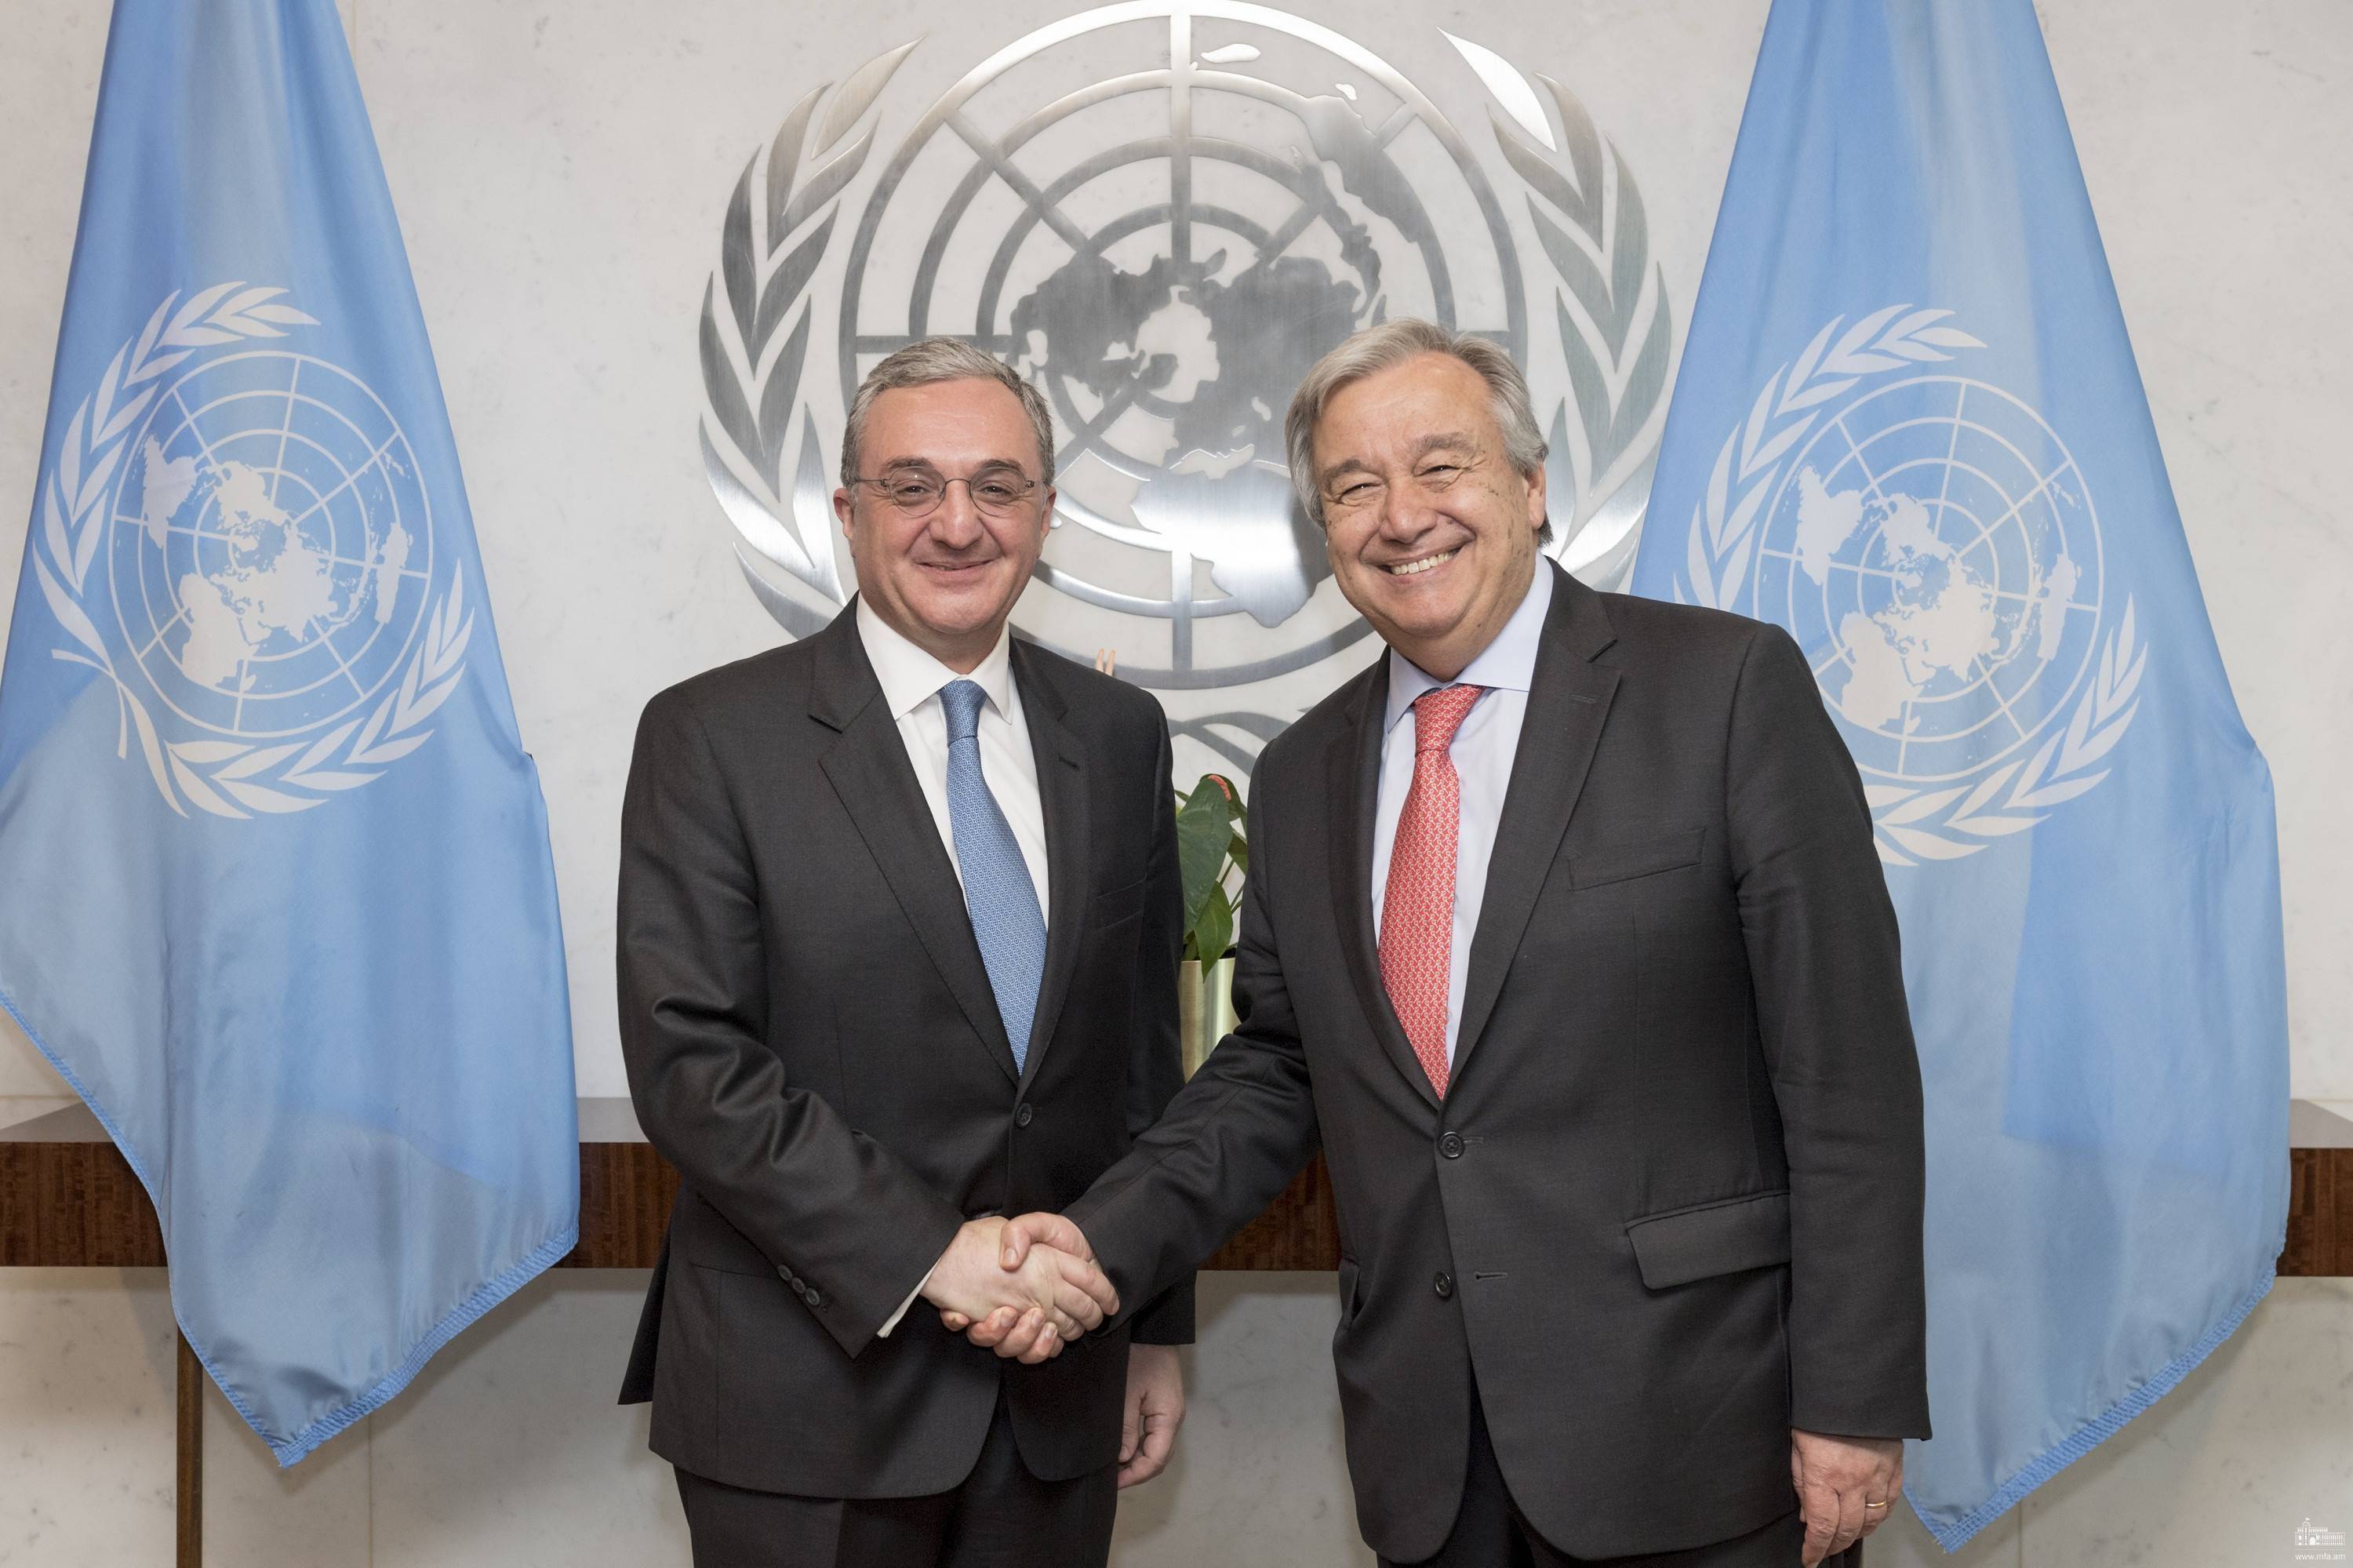 Foreign Minister Zohrab Mnatsakanyan's letter to UN Secretary General António Guterres